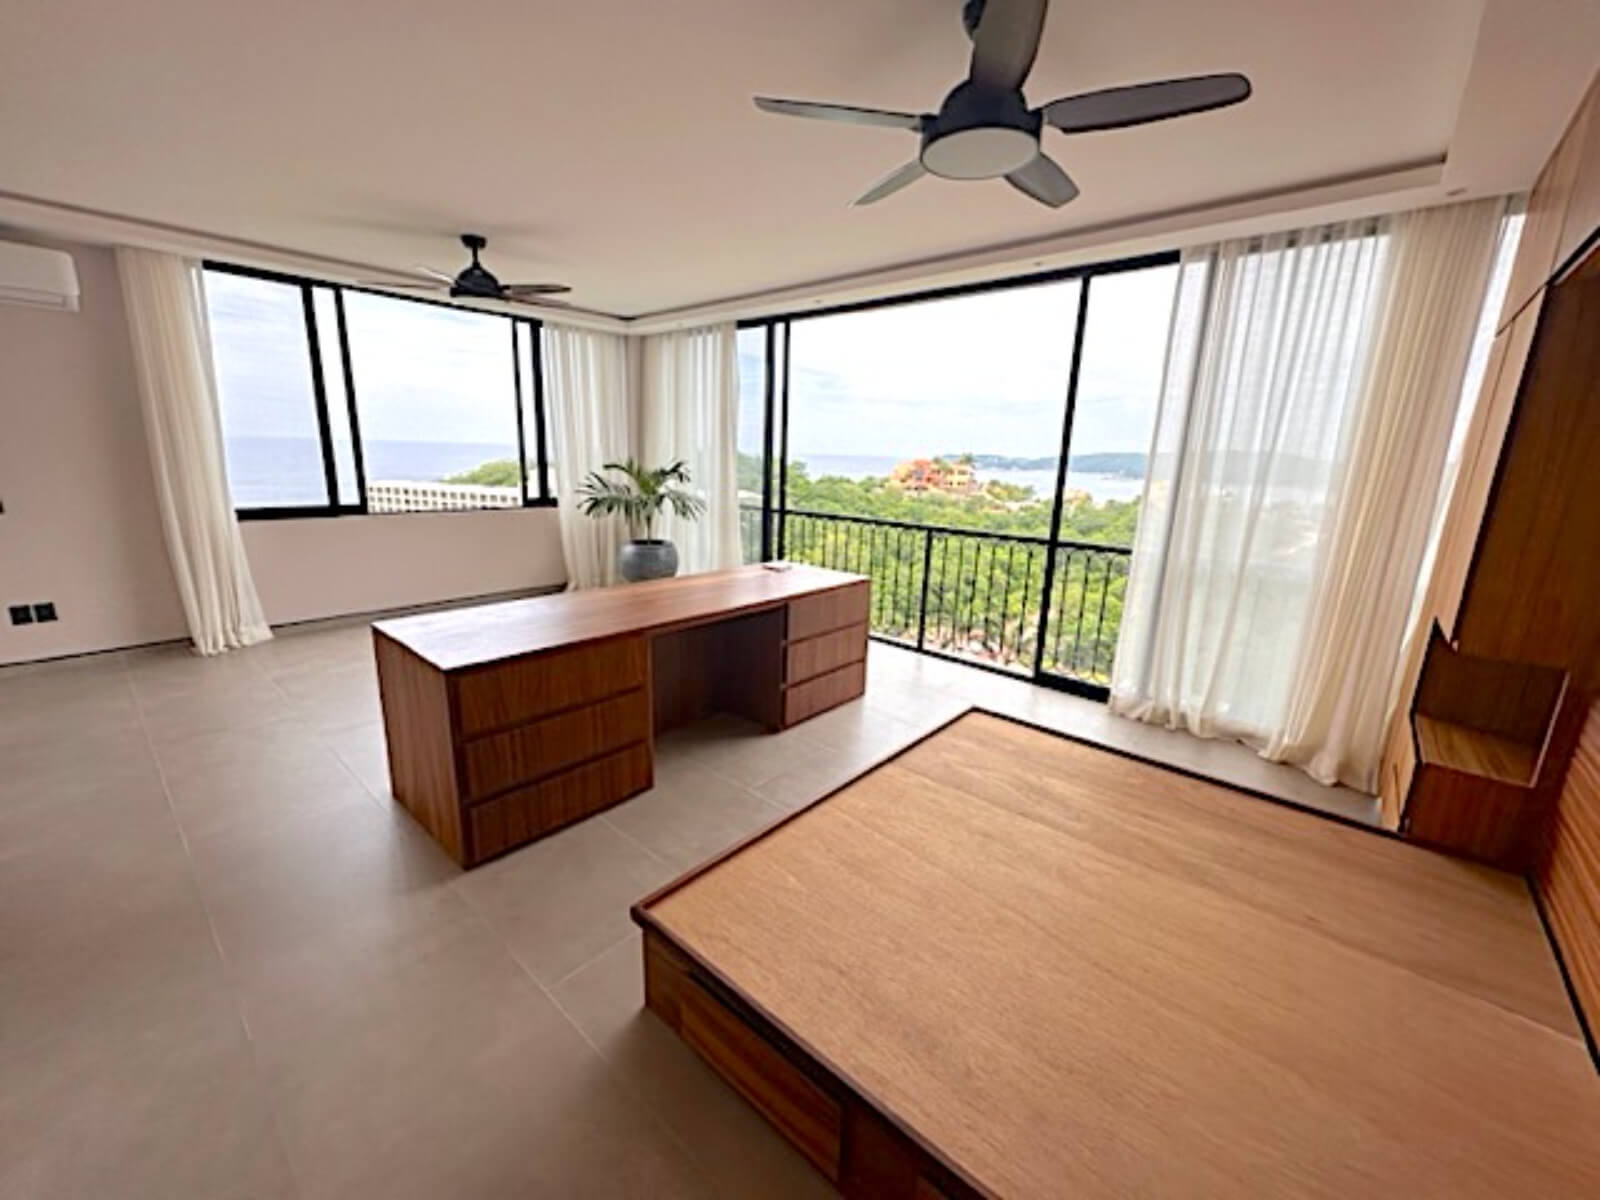 Apartment steps from the beach, pool, palapa, furnished, for sale Santa Cruz, Huatulco.